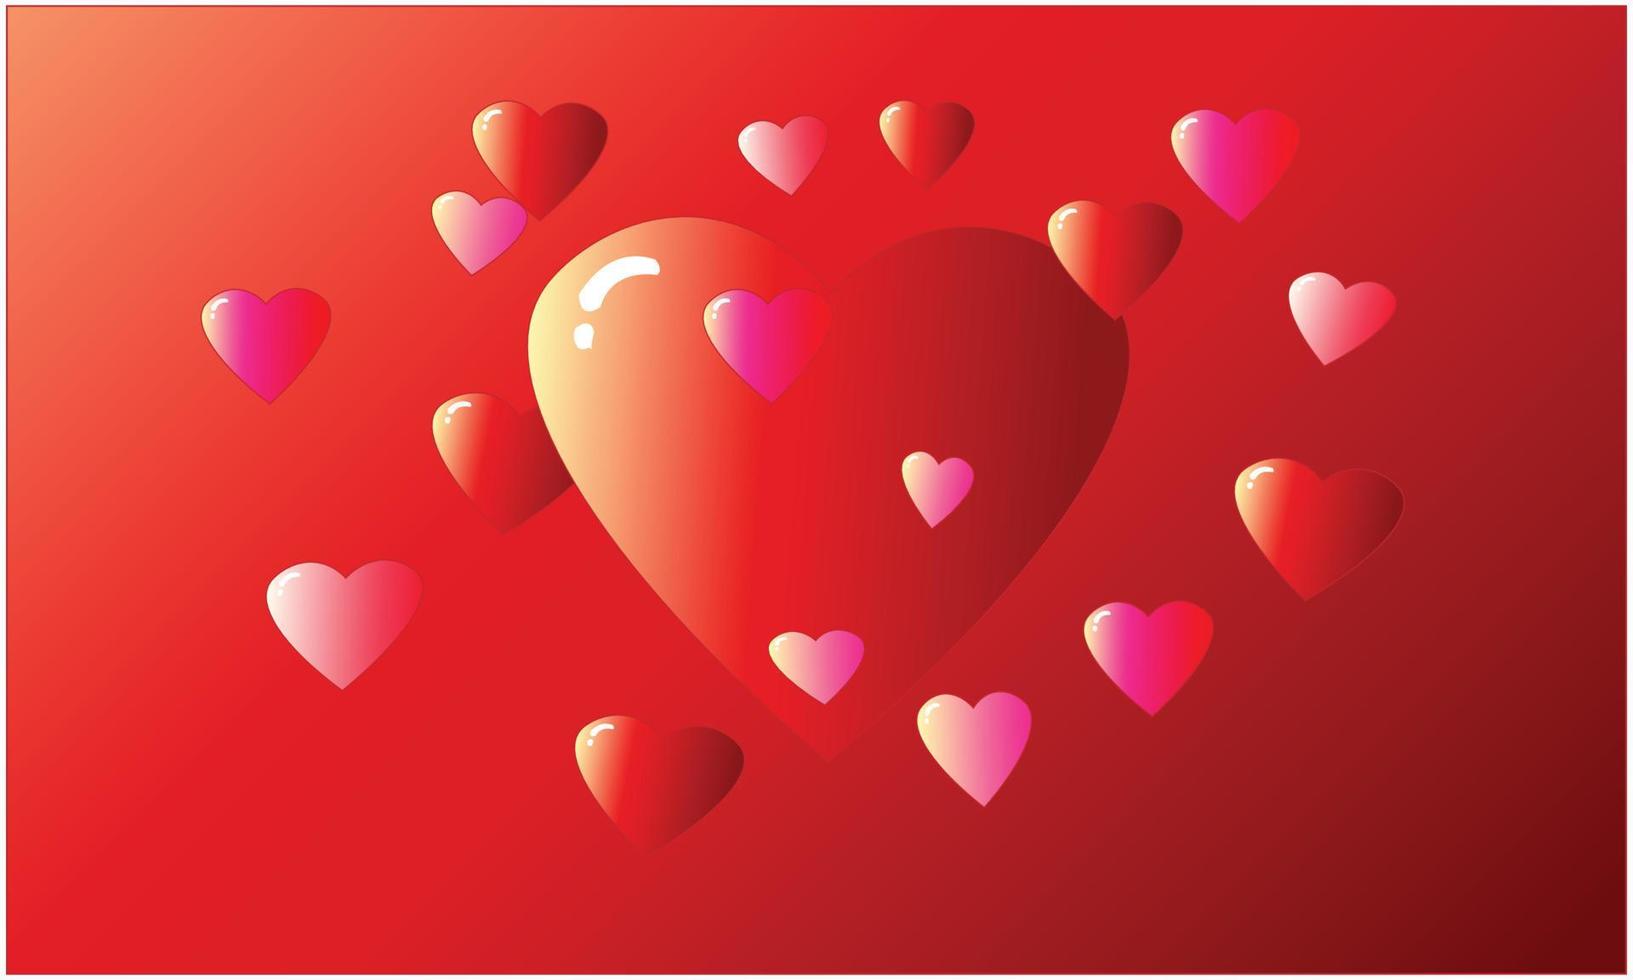 Love illustration design with heart vector